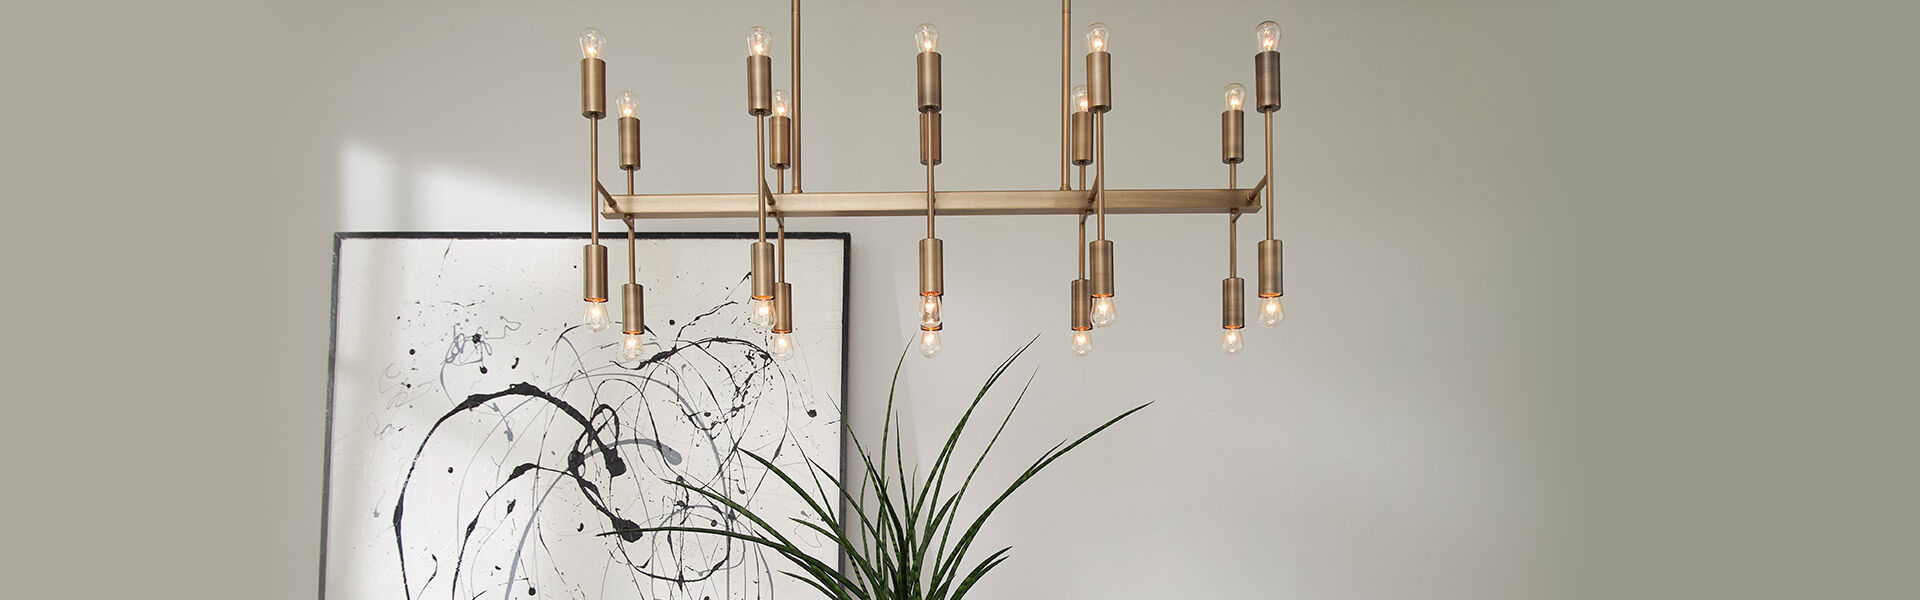 Trend Lighting | 20% Off Entire Line | ends 7.7